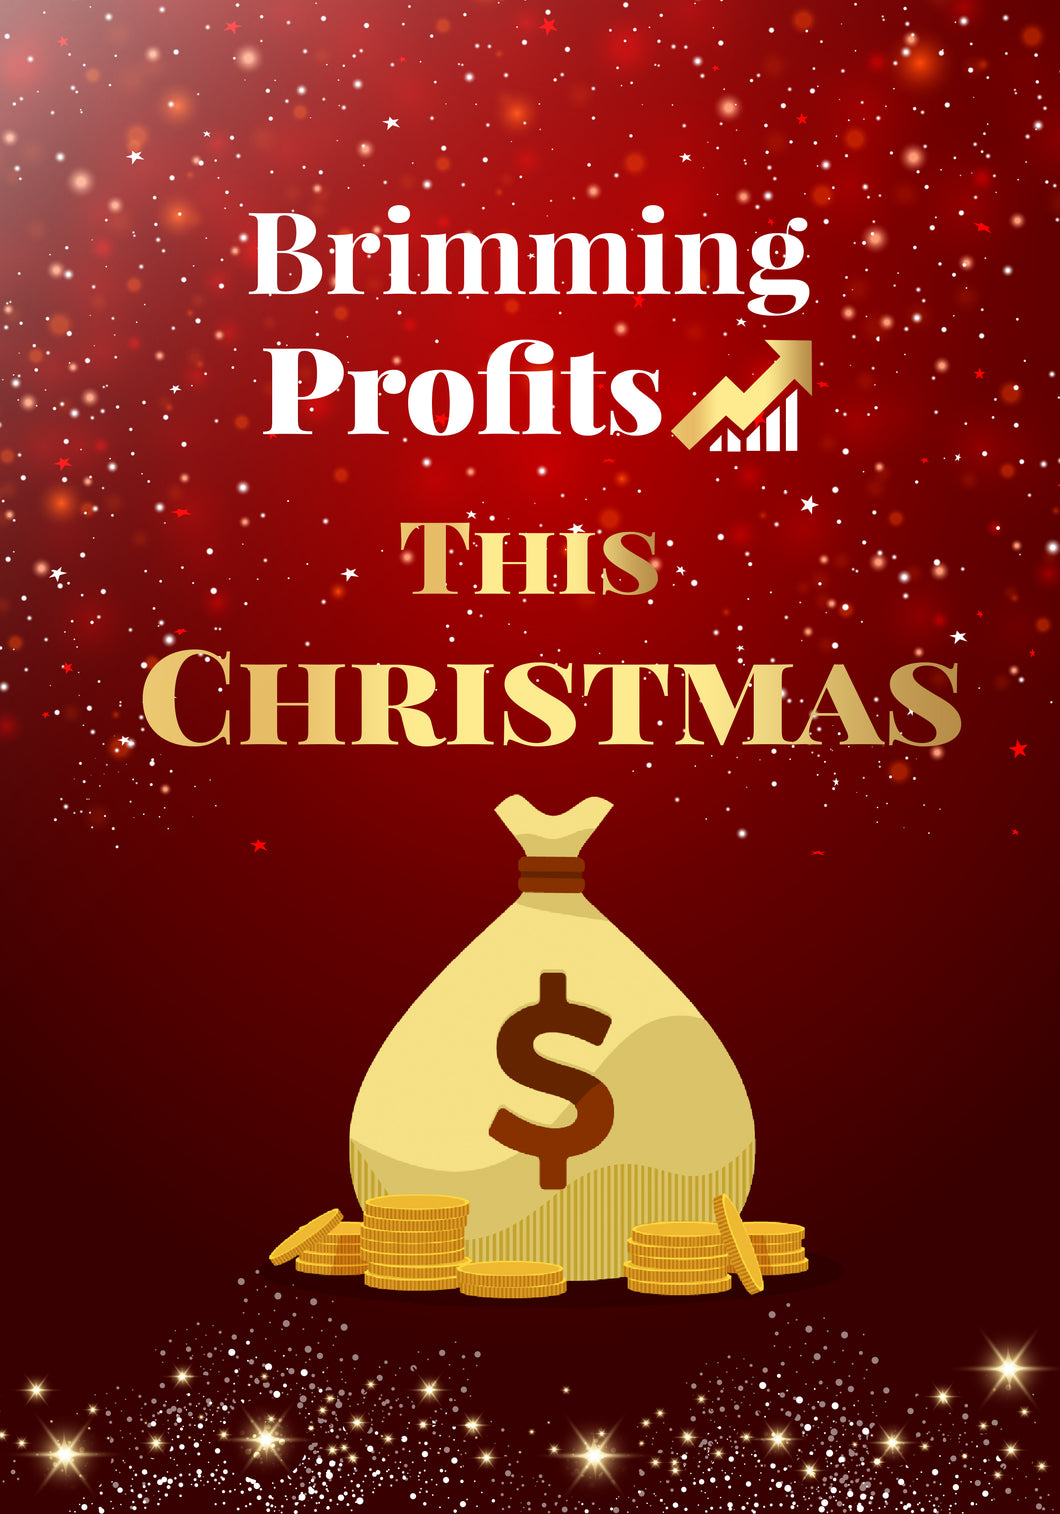 Brimming Profits This Christmas Ebook by Phonicia Palmer